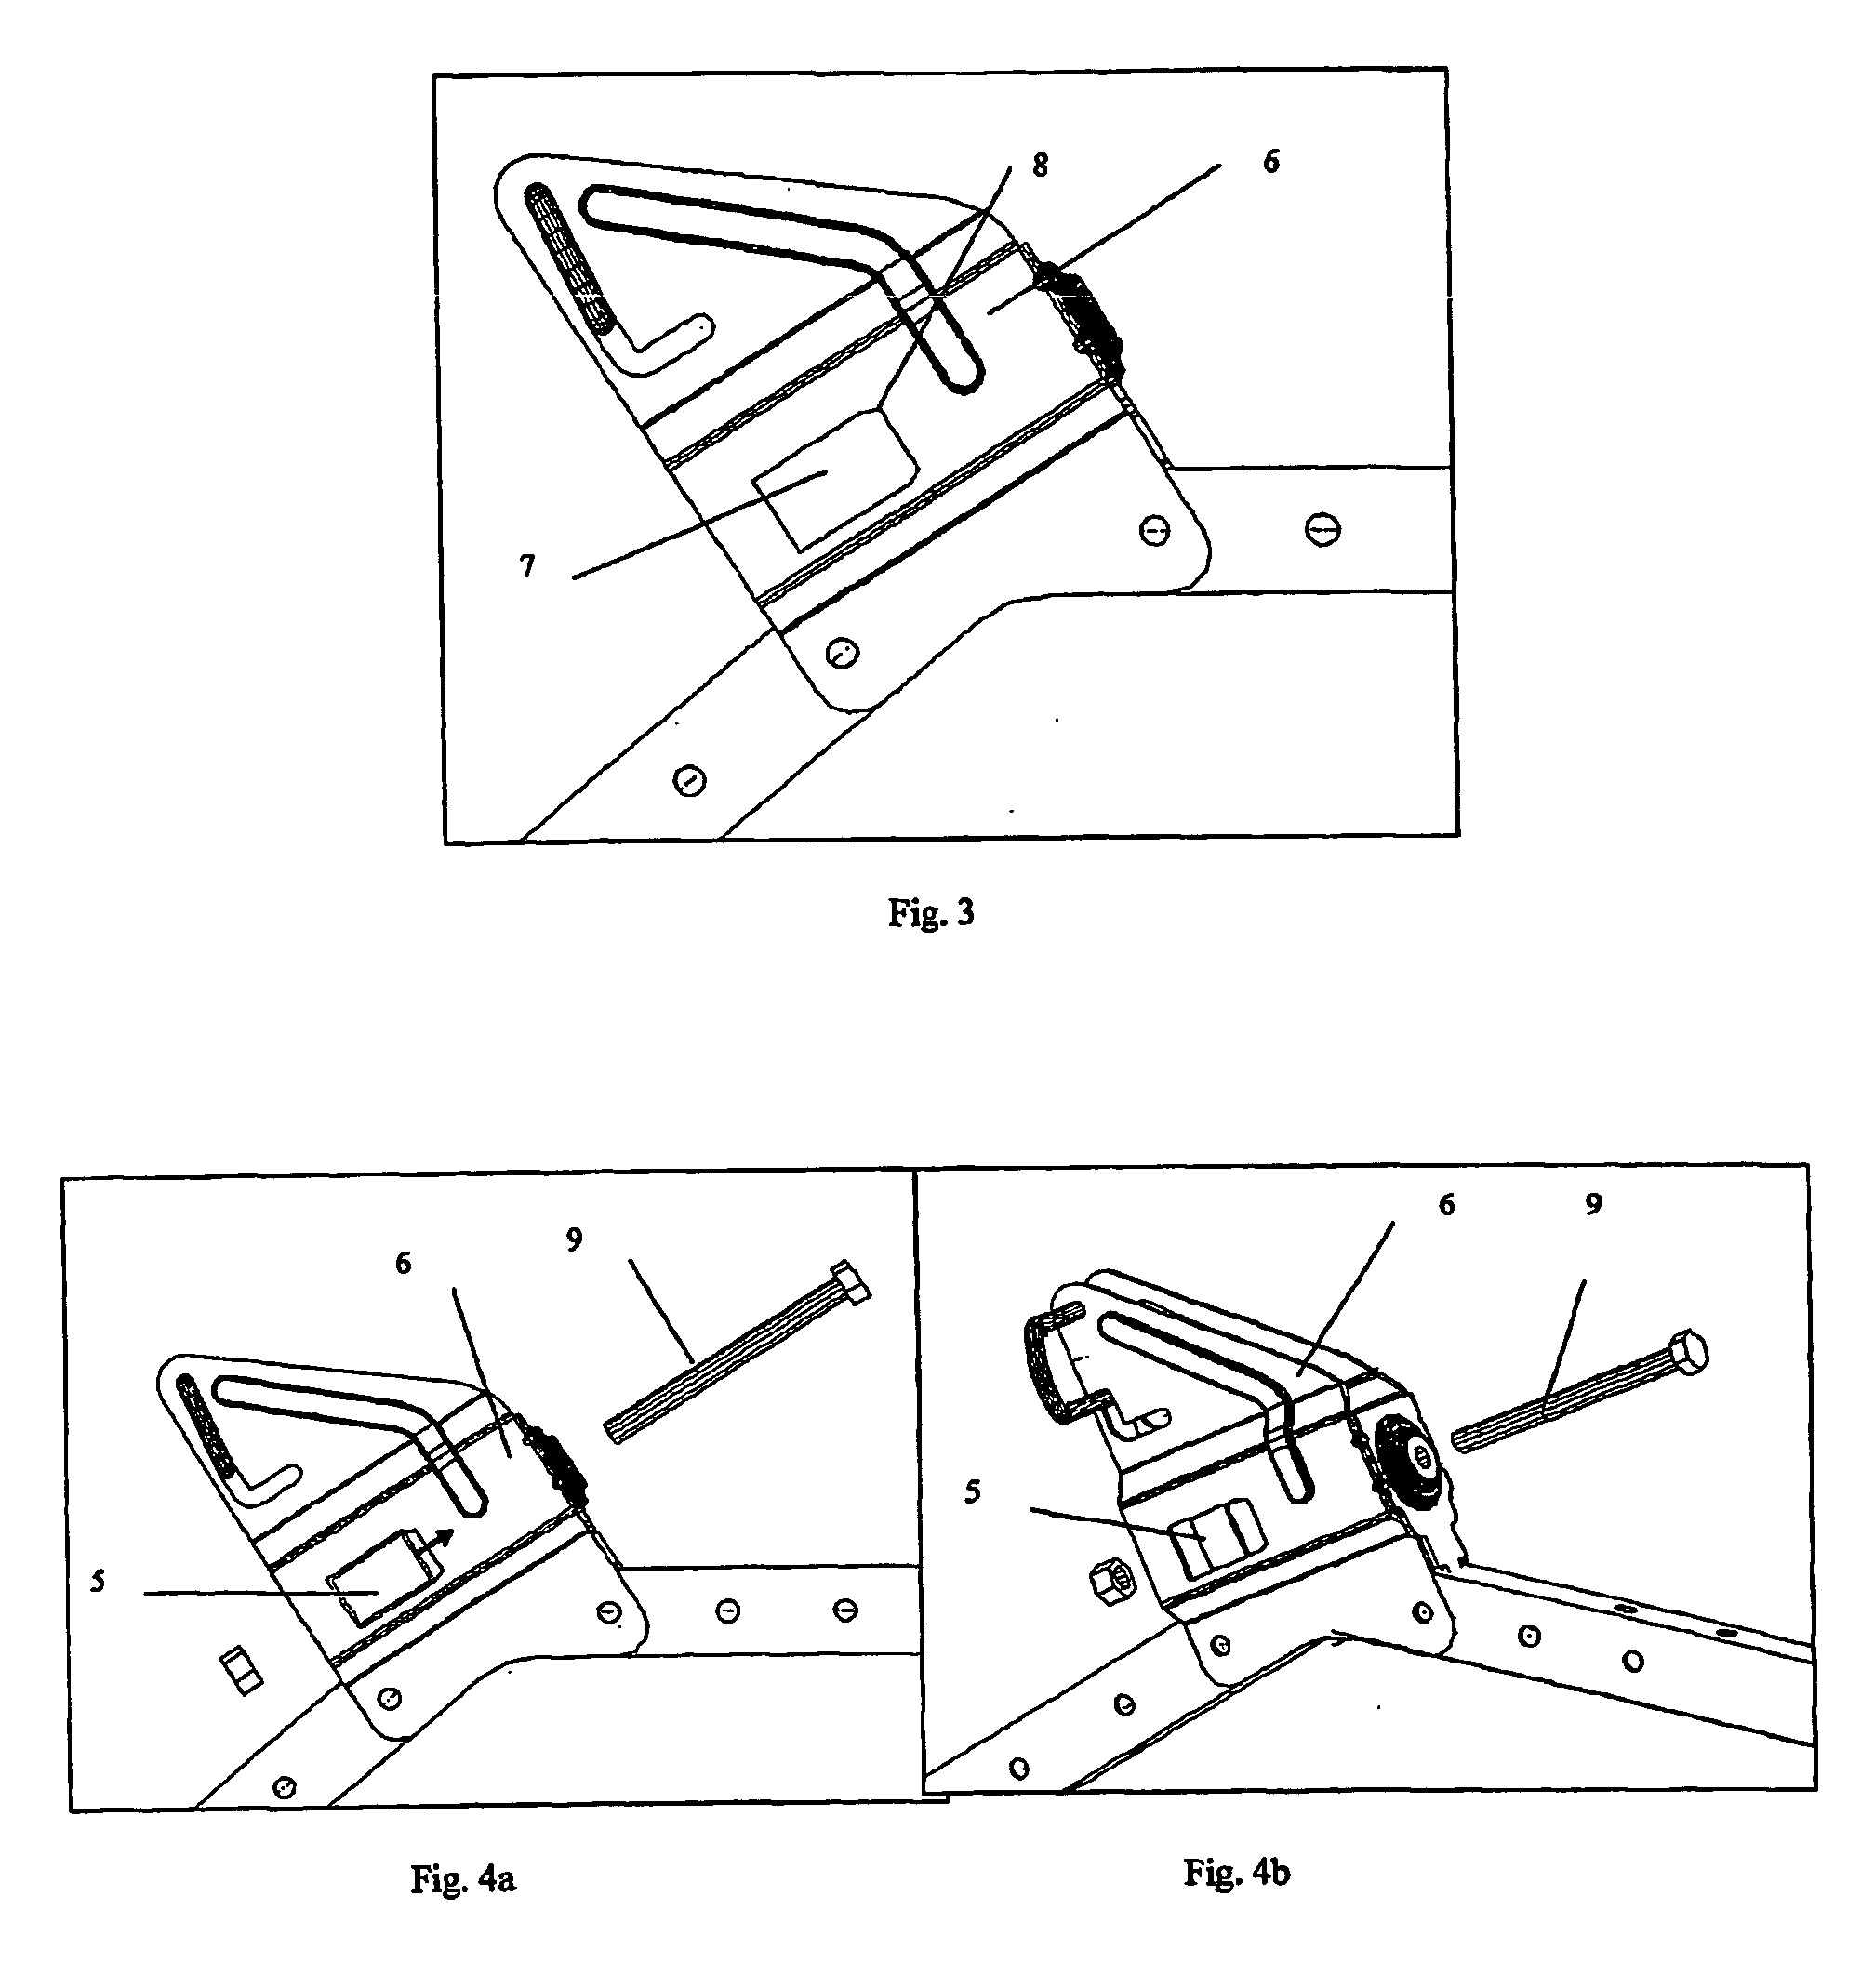 Sofa-Bed with Innovative Elements for Assembly and Position Adjustment